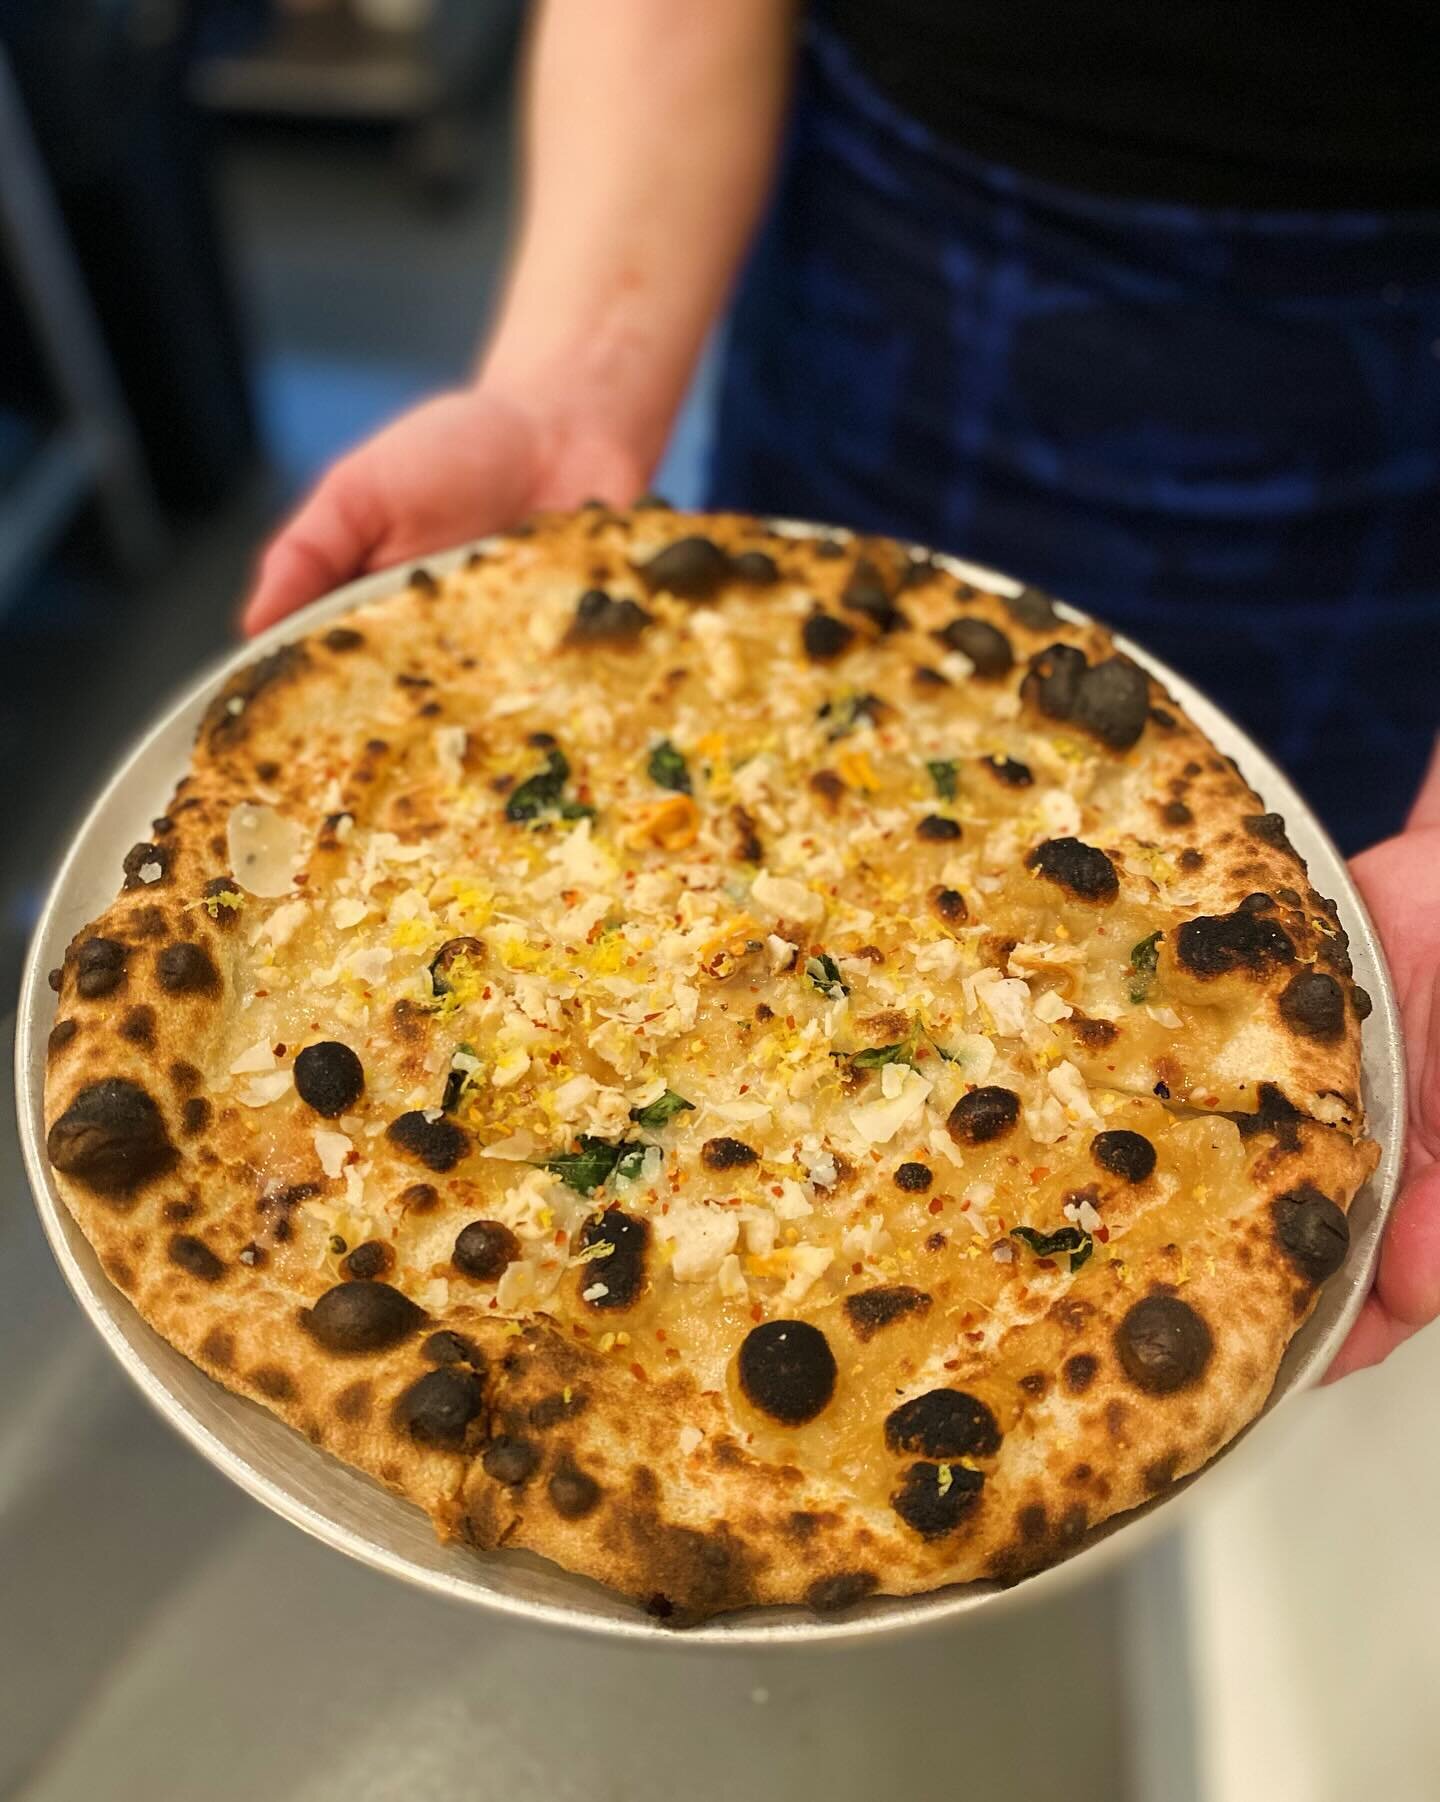 Not one but TWO pizza specials on deck. 🤝

1️⃣ Clam pizza with roasted garlic, oregano, clams, pecorino Romano, crushed red pepper and lemon zest. 

2️⃣ Al Pastor pizza with smoked pork shoulder, adobo, chili pickled pineapple, mozzarella, cotija an